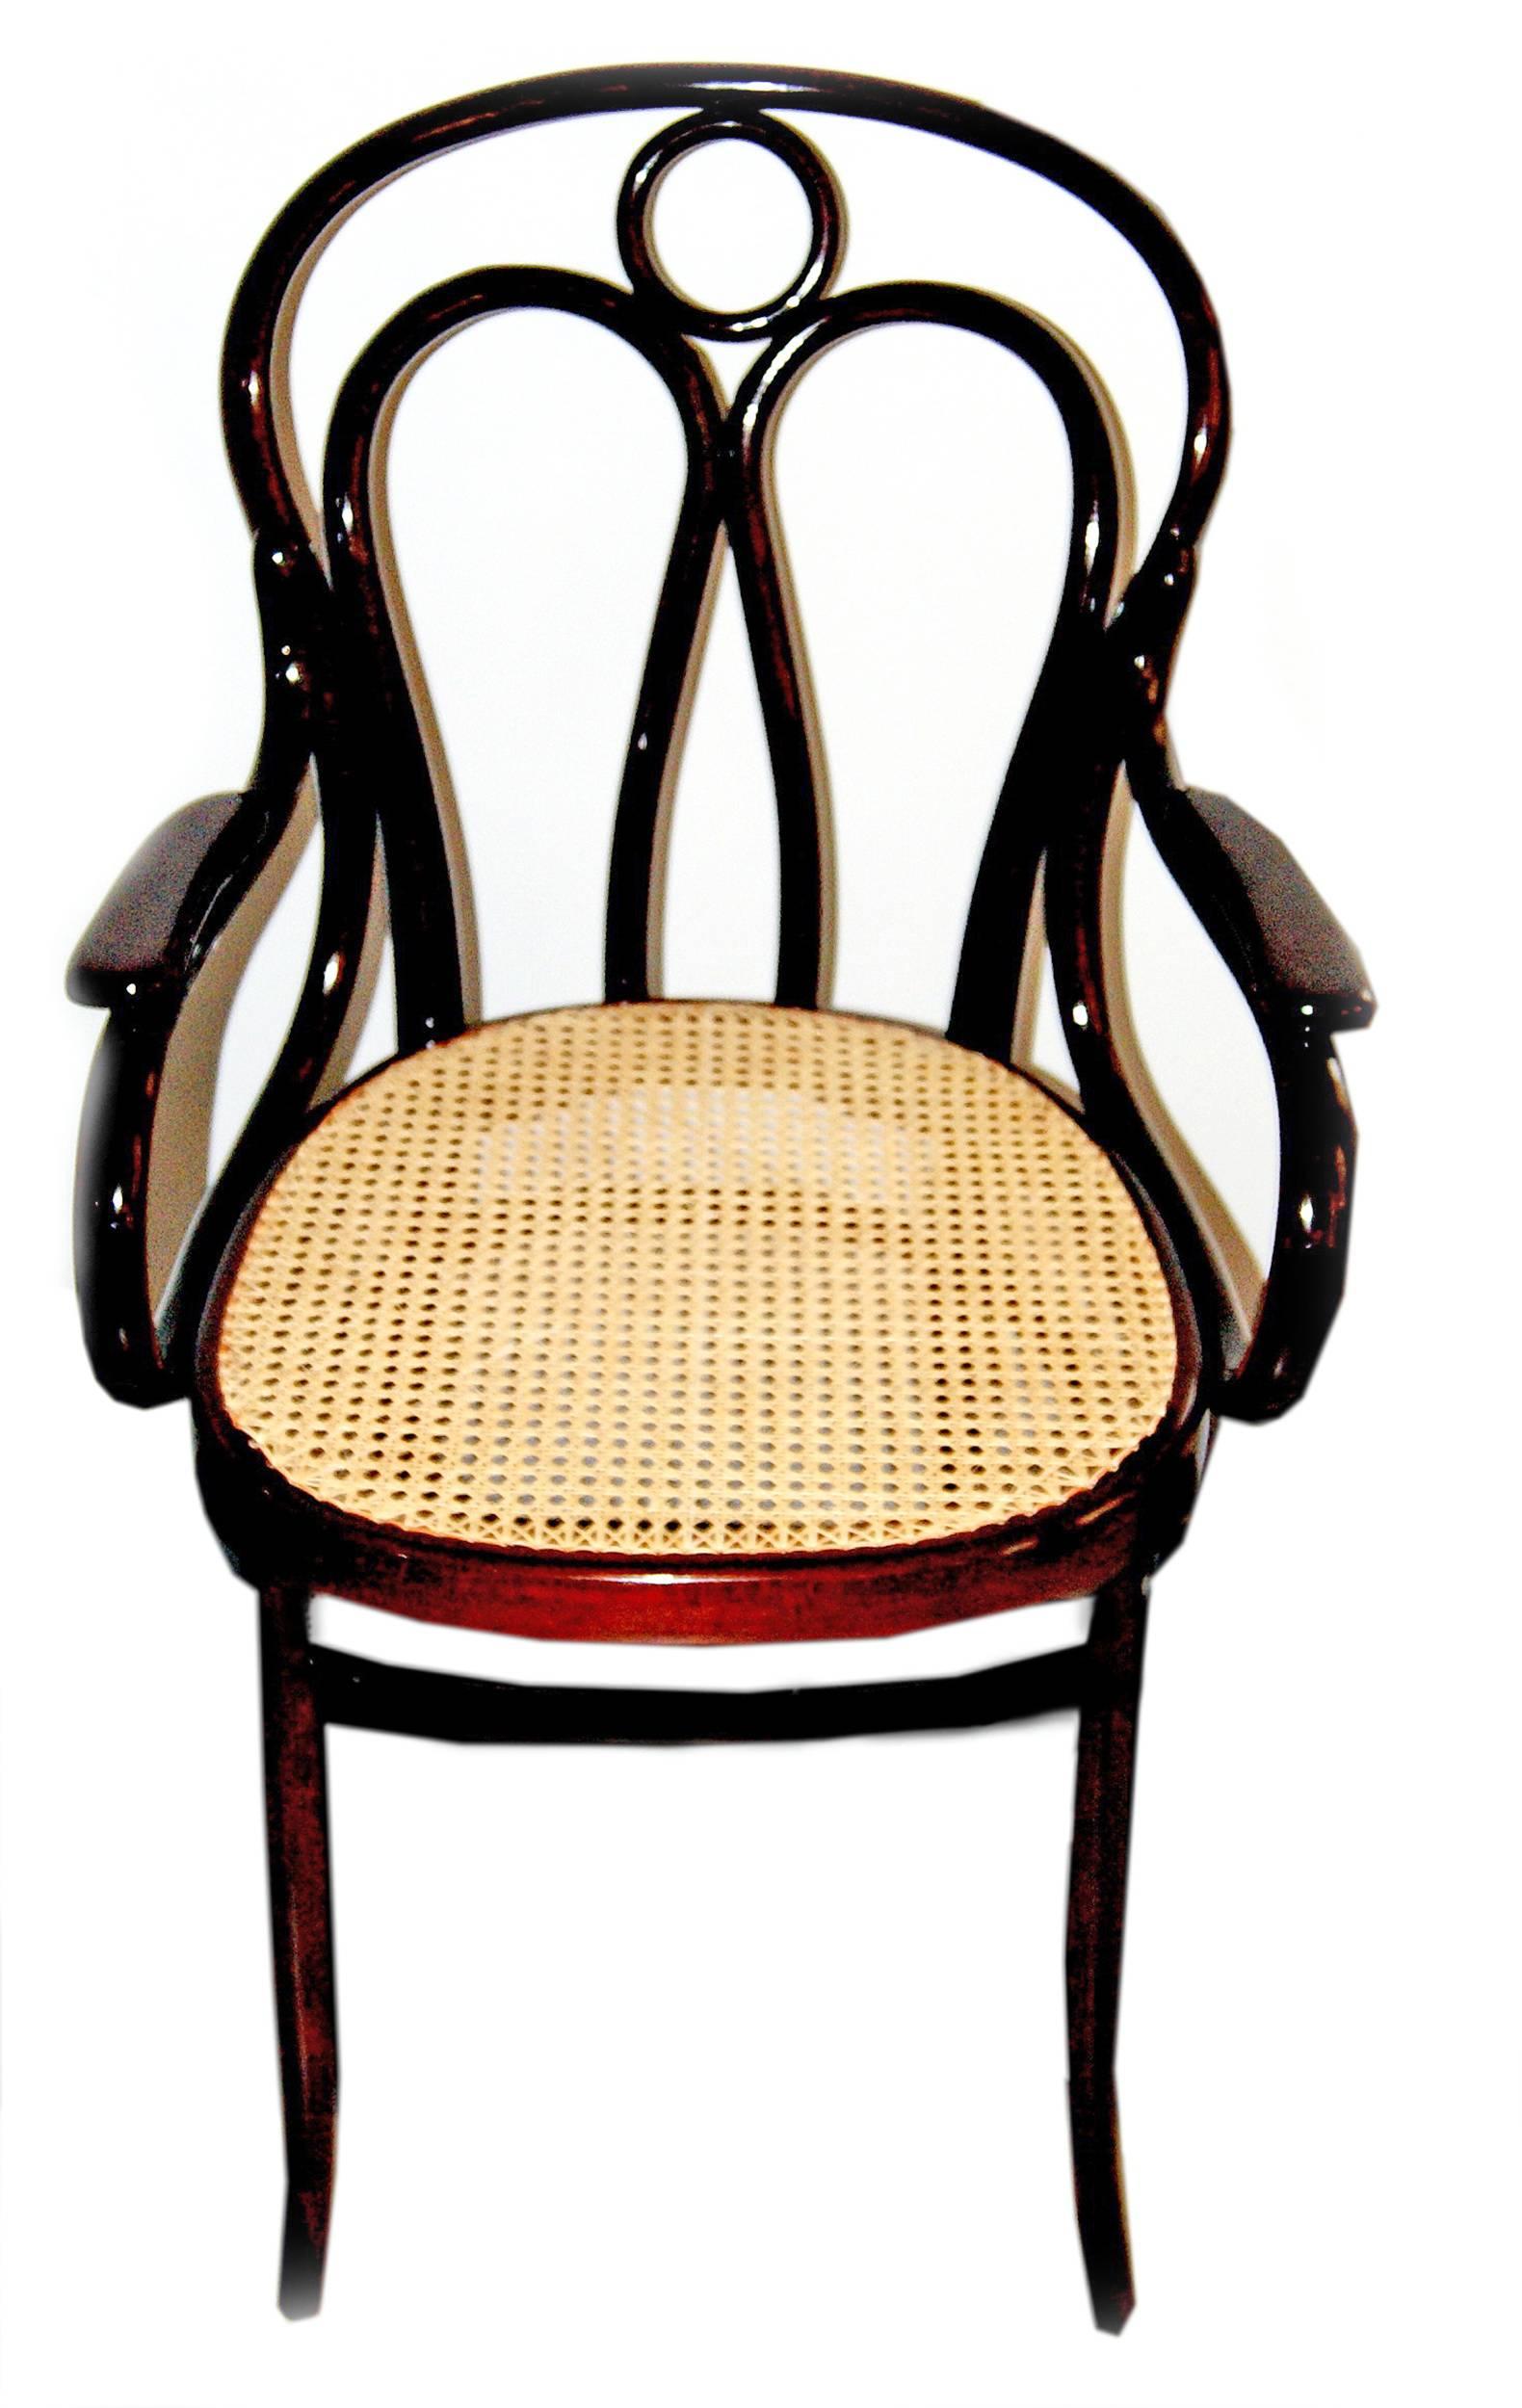 Jacob and Josef Kohn bentwood armchair (Model 36)
Made in Vienna / Austria, Art Nouveau period.
beechwood 
mahogany stained 
seat is covered with wickerwork (restored)
made, circa 1905

Bibliography:
J.& J. Kohn Catalogues 1904 & 1907